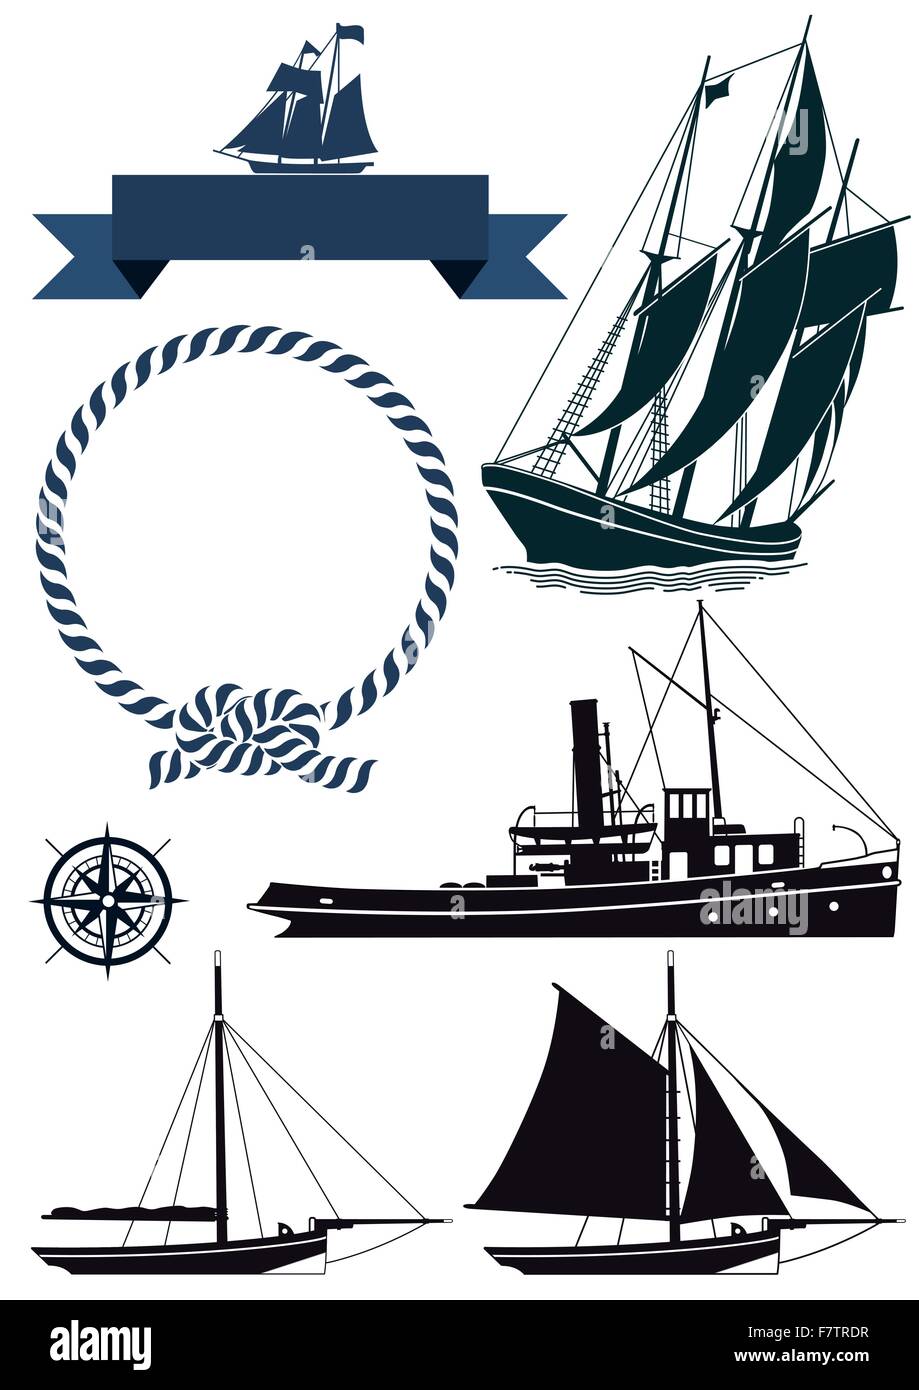 sailing ship and banners Stock Vector